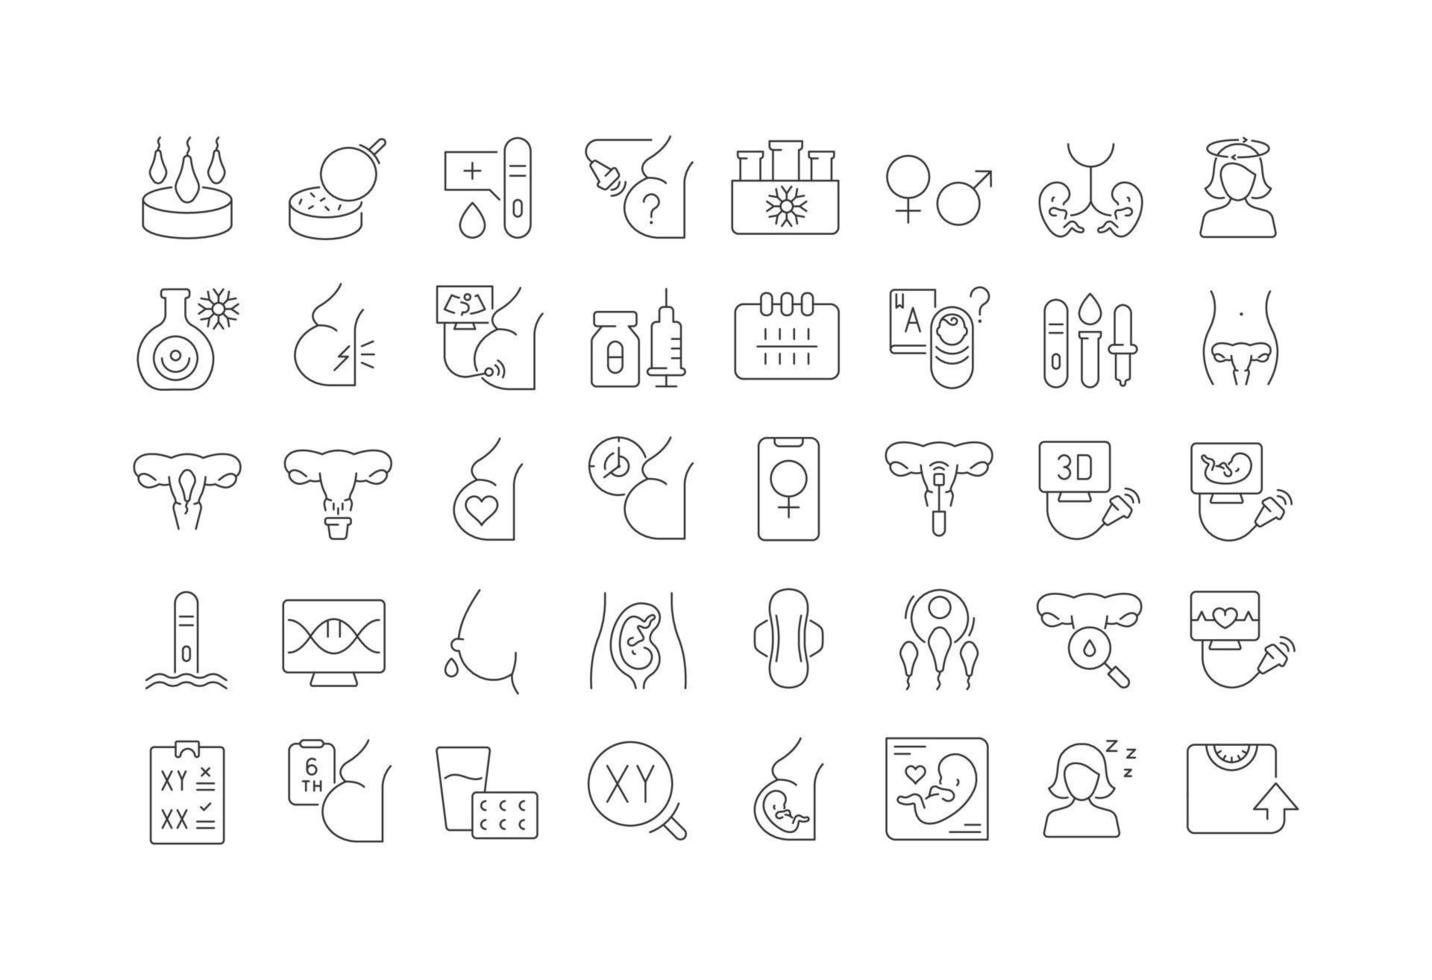 Set of linear icons of Pregnancy vector